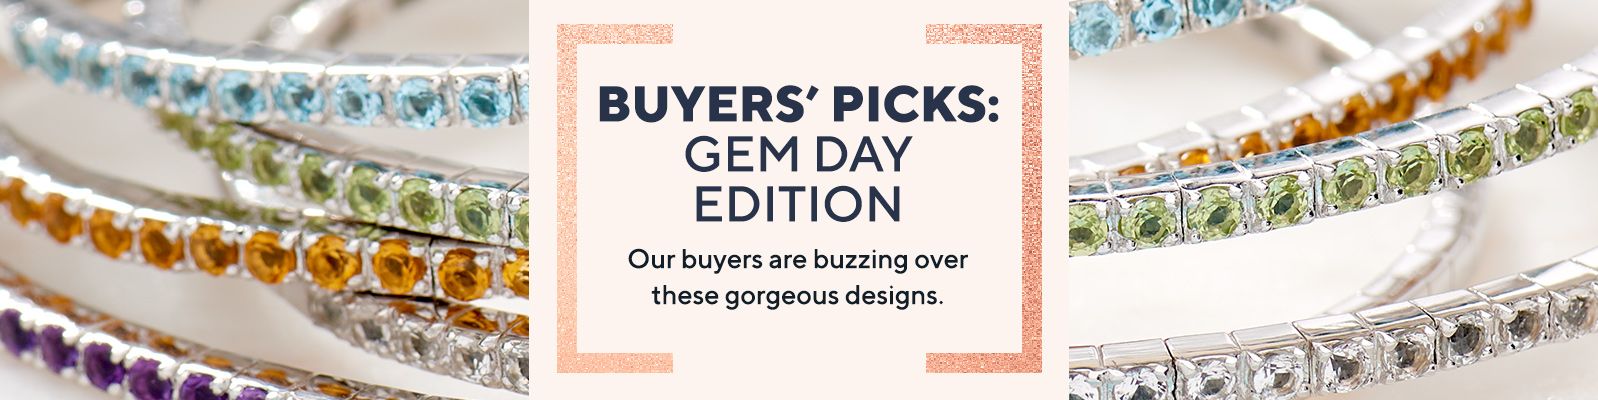 Buyers' Picks: Gem Day Edition - Our buyers are buzzing over these gorgeous designs.